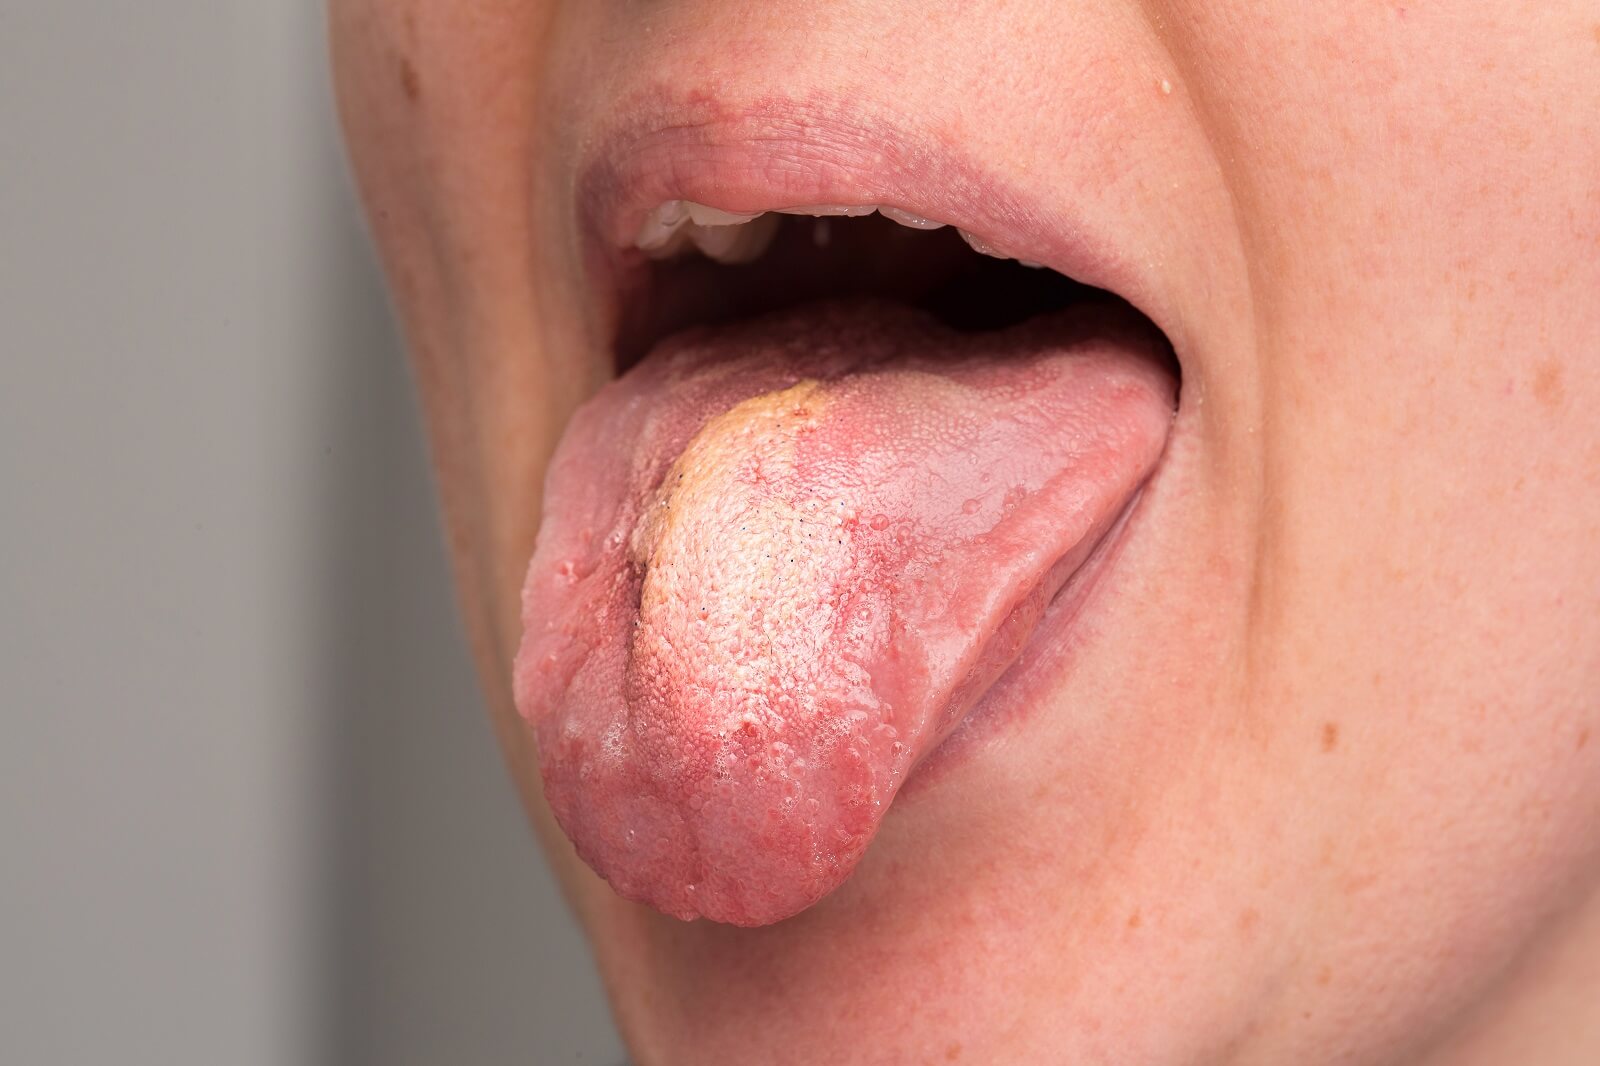 A woman sticking tongue out with oral thrush visible as a white plaque.